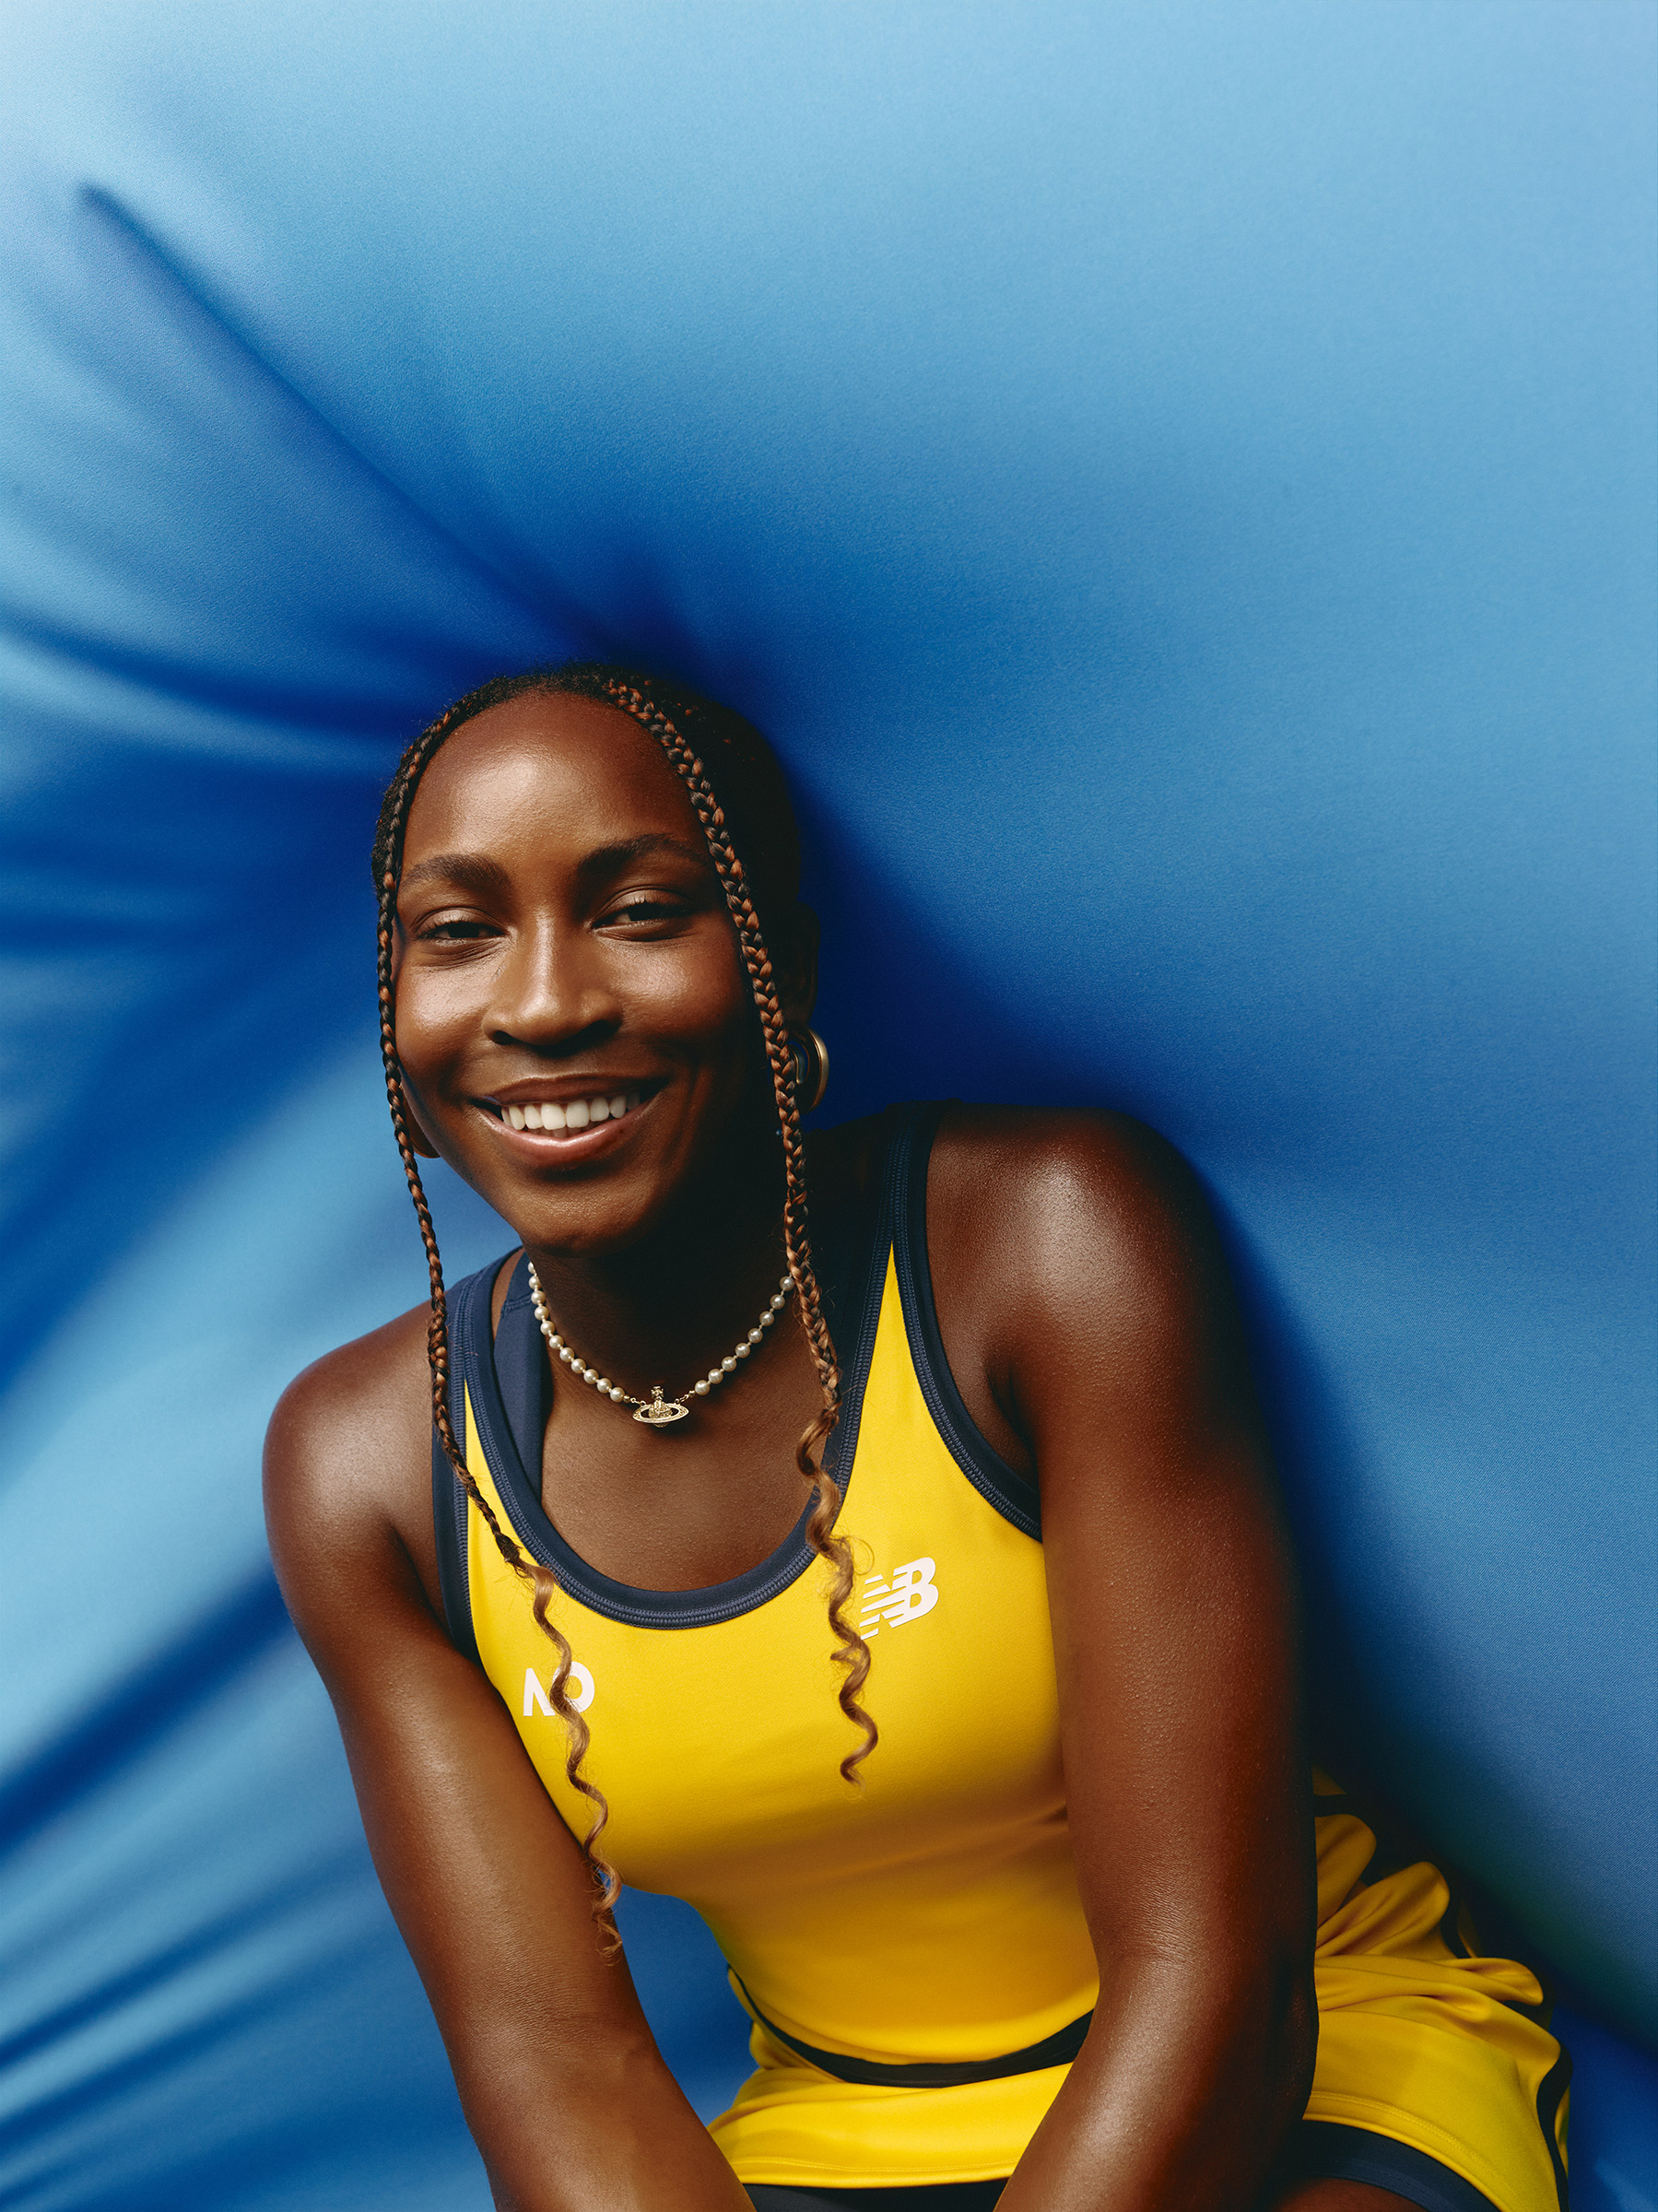 Gauff, ranked No. 3 in the world, photographed in Melbourne on Jan. 9 (Daphne Nguyen for TIME)